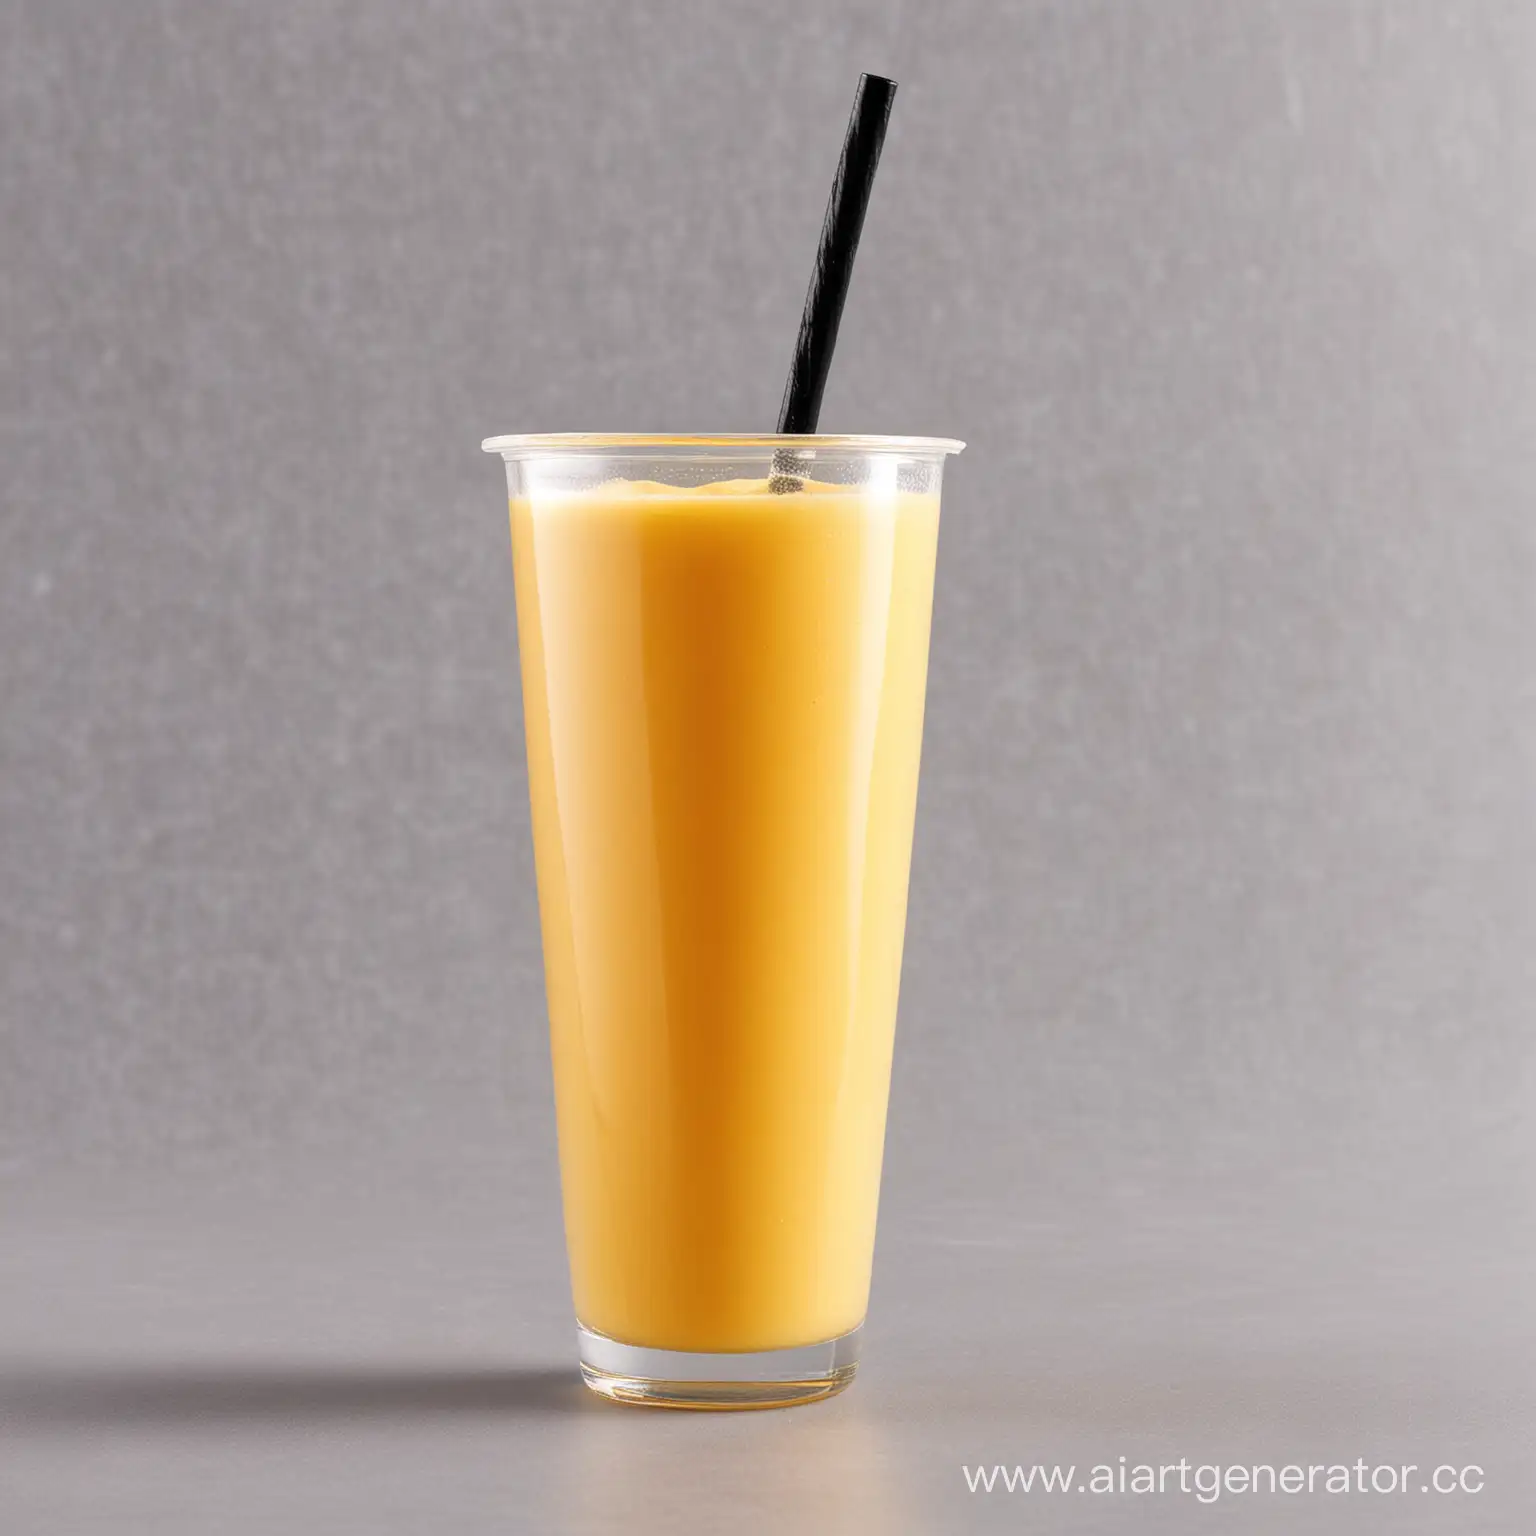 Refreshing-Mango-Shake-in-04-Liter-Transparent-Cup-with-Black-Straw